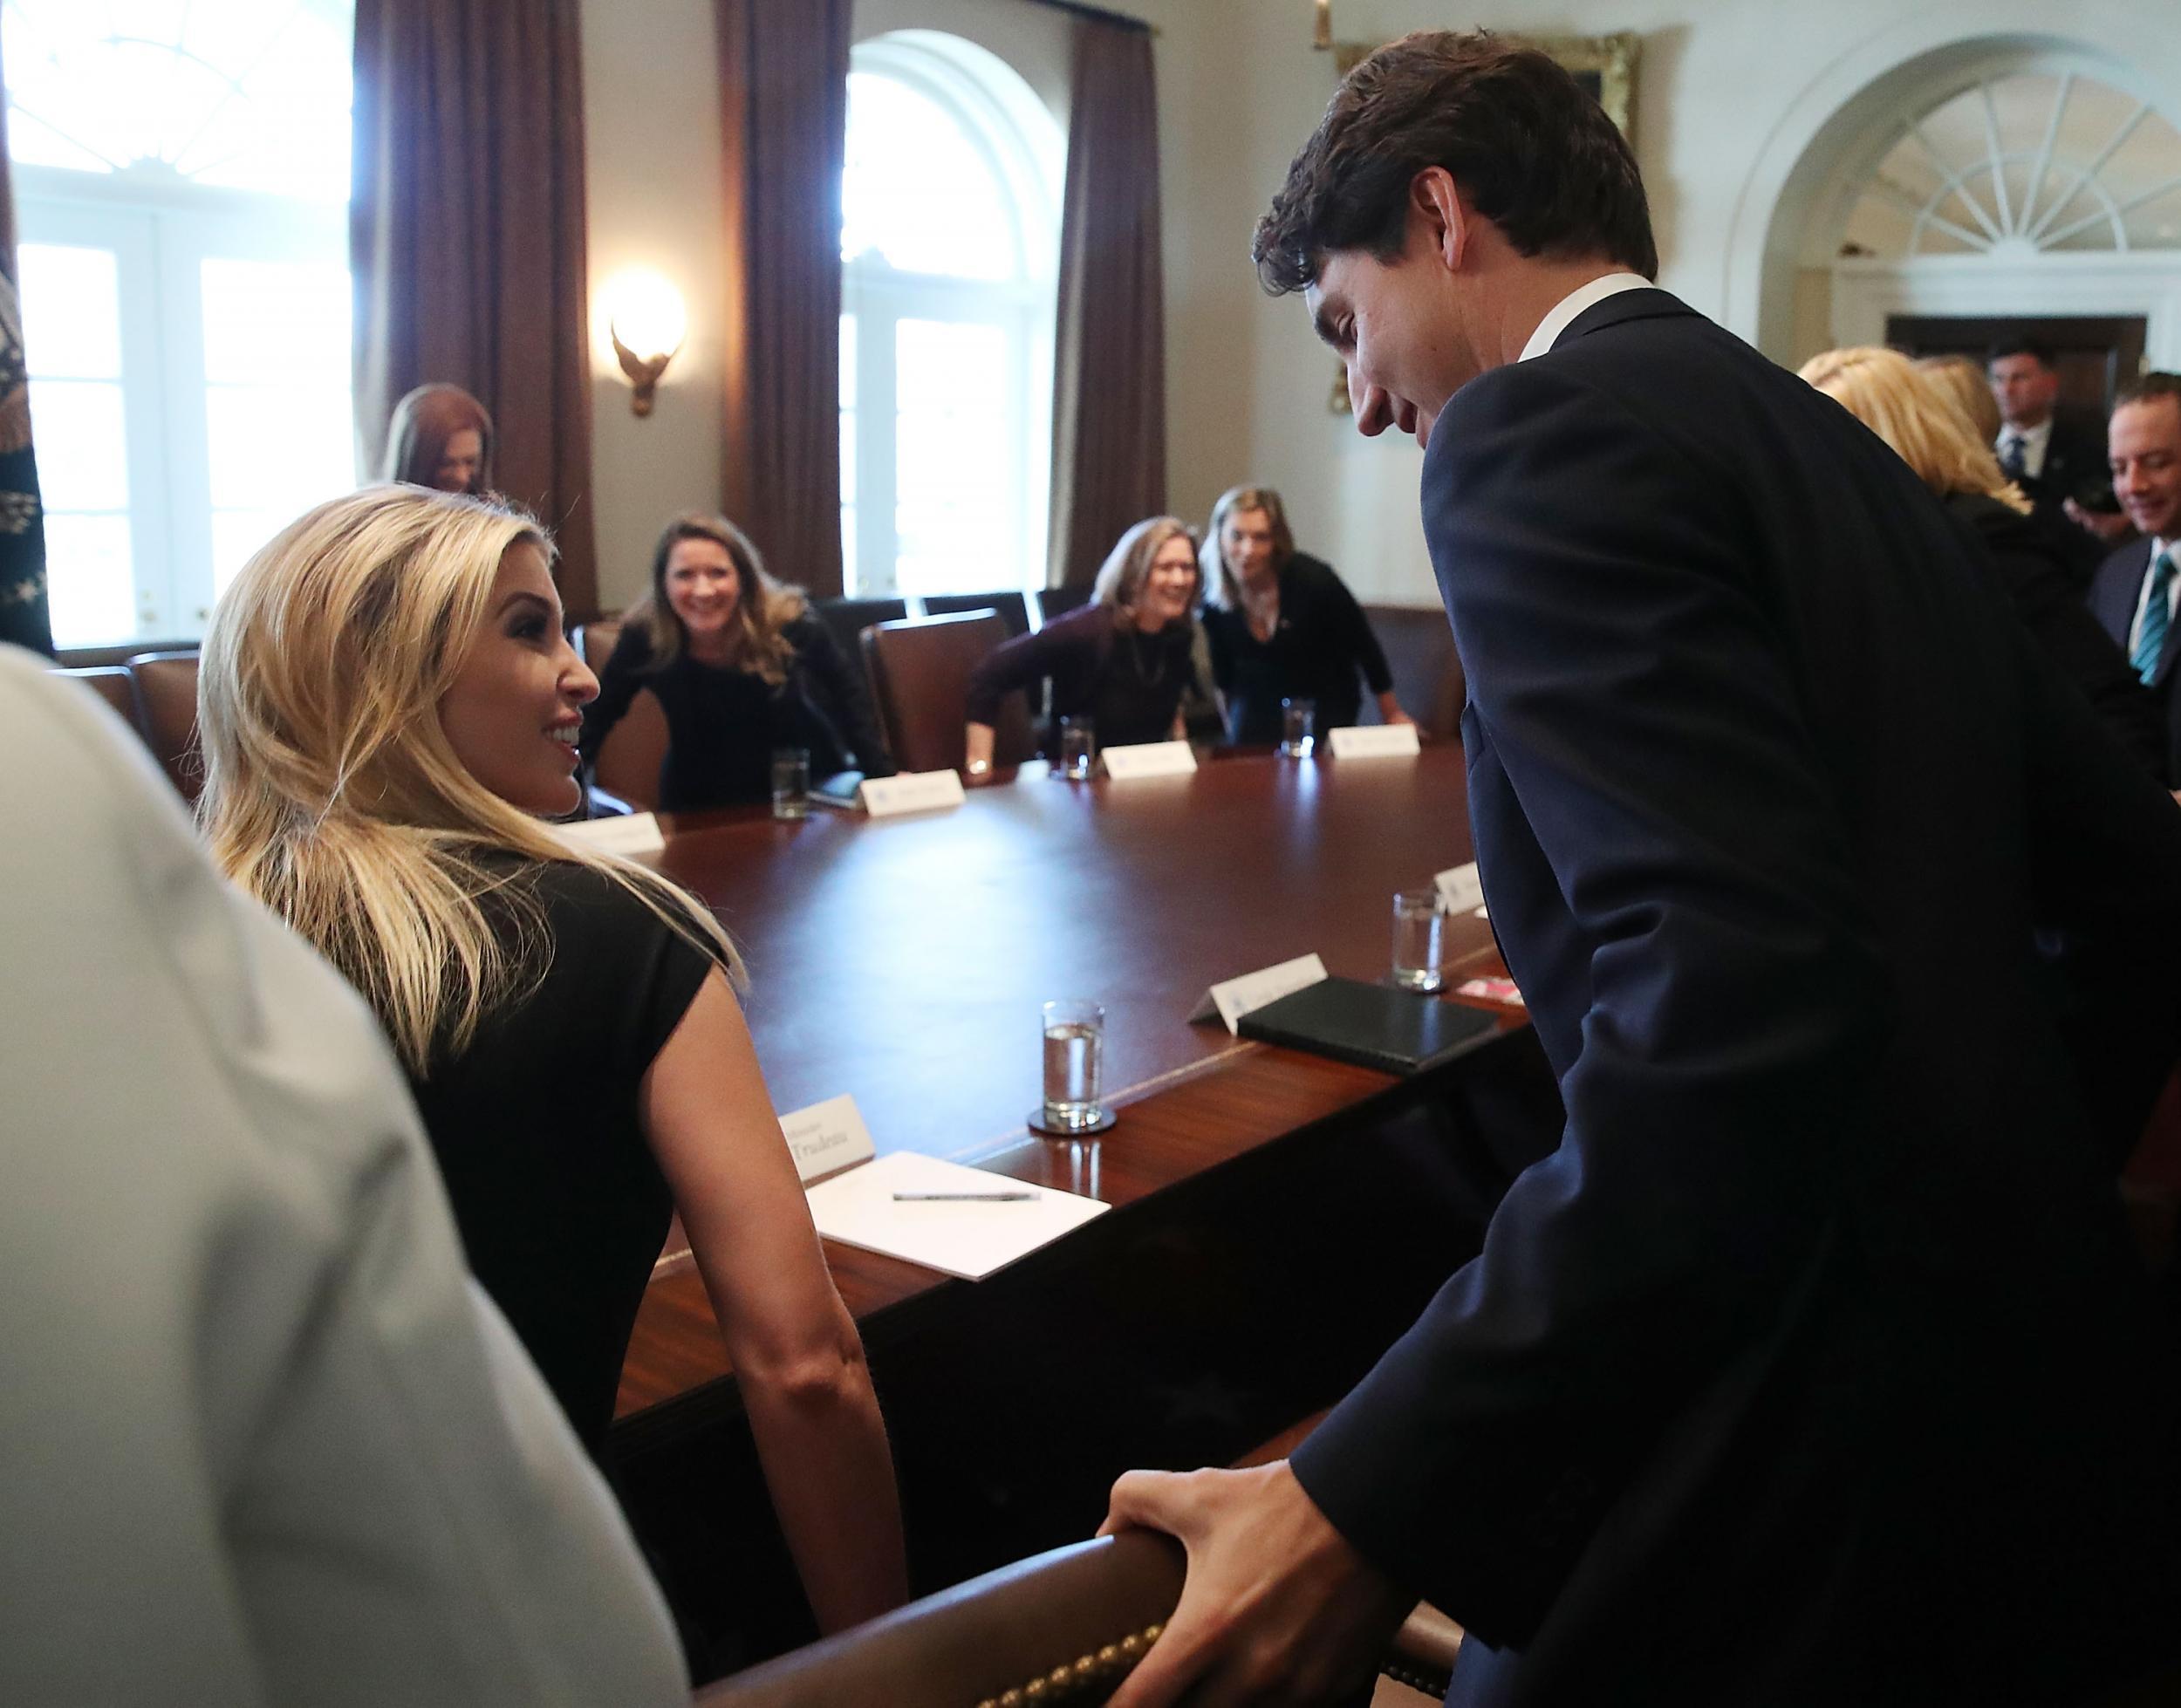 &#13;
Mr Trudeau helps Ivanka Trump with her chair &#13;